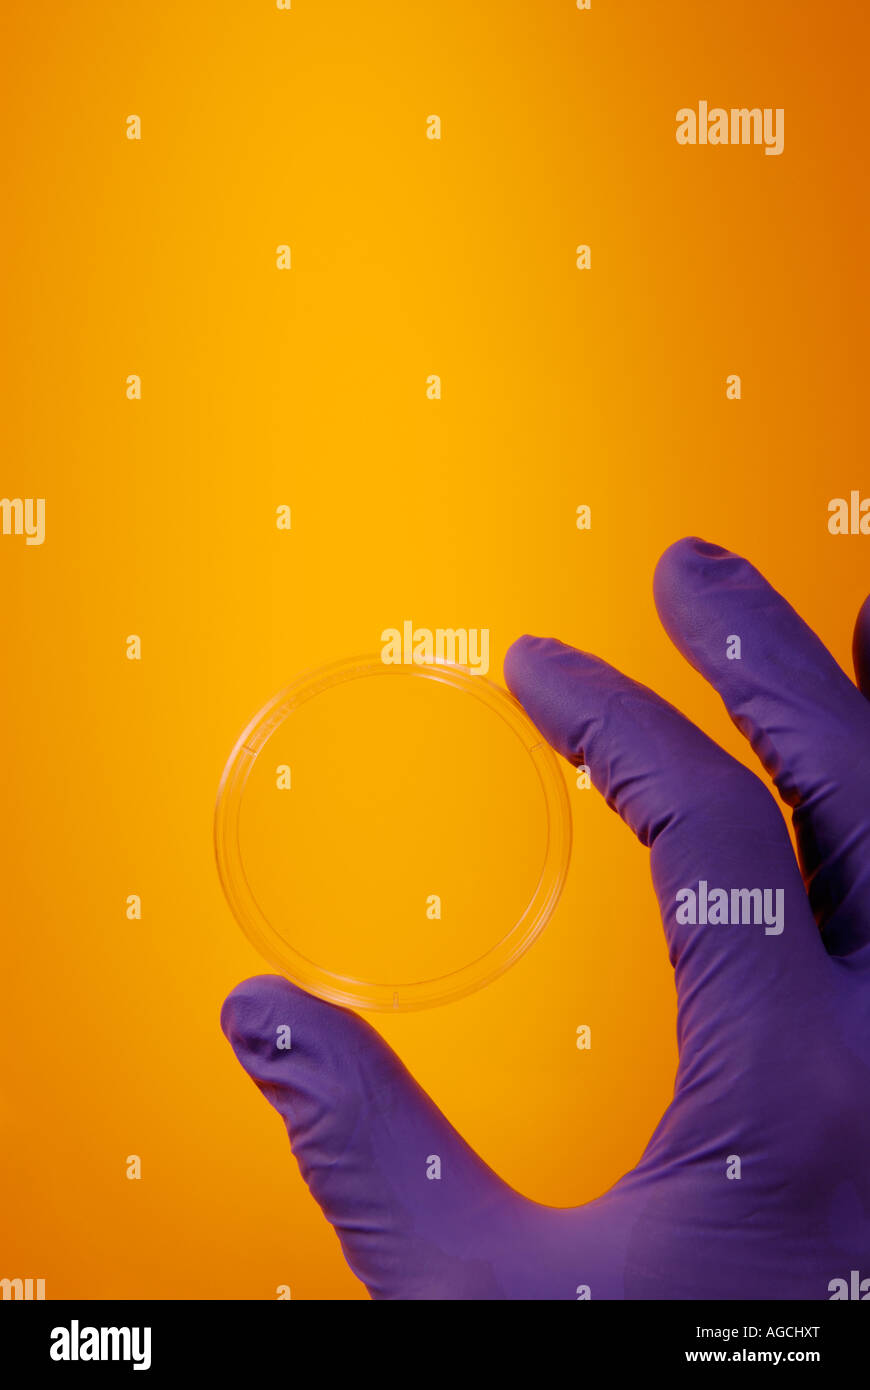 A scientist s gloved hand working with a petri dish Stock Photo